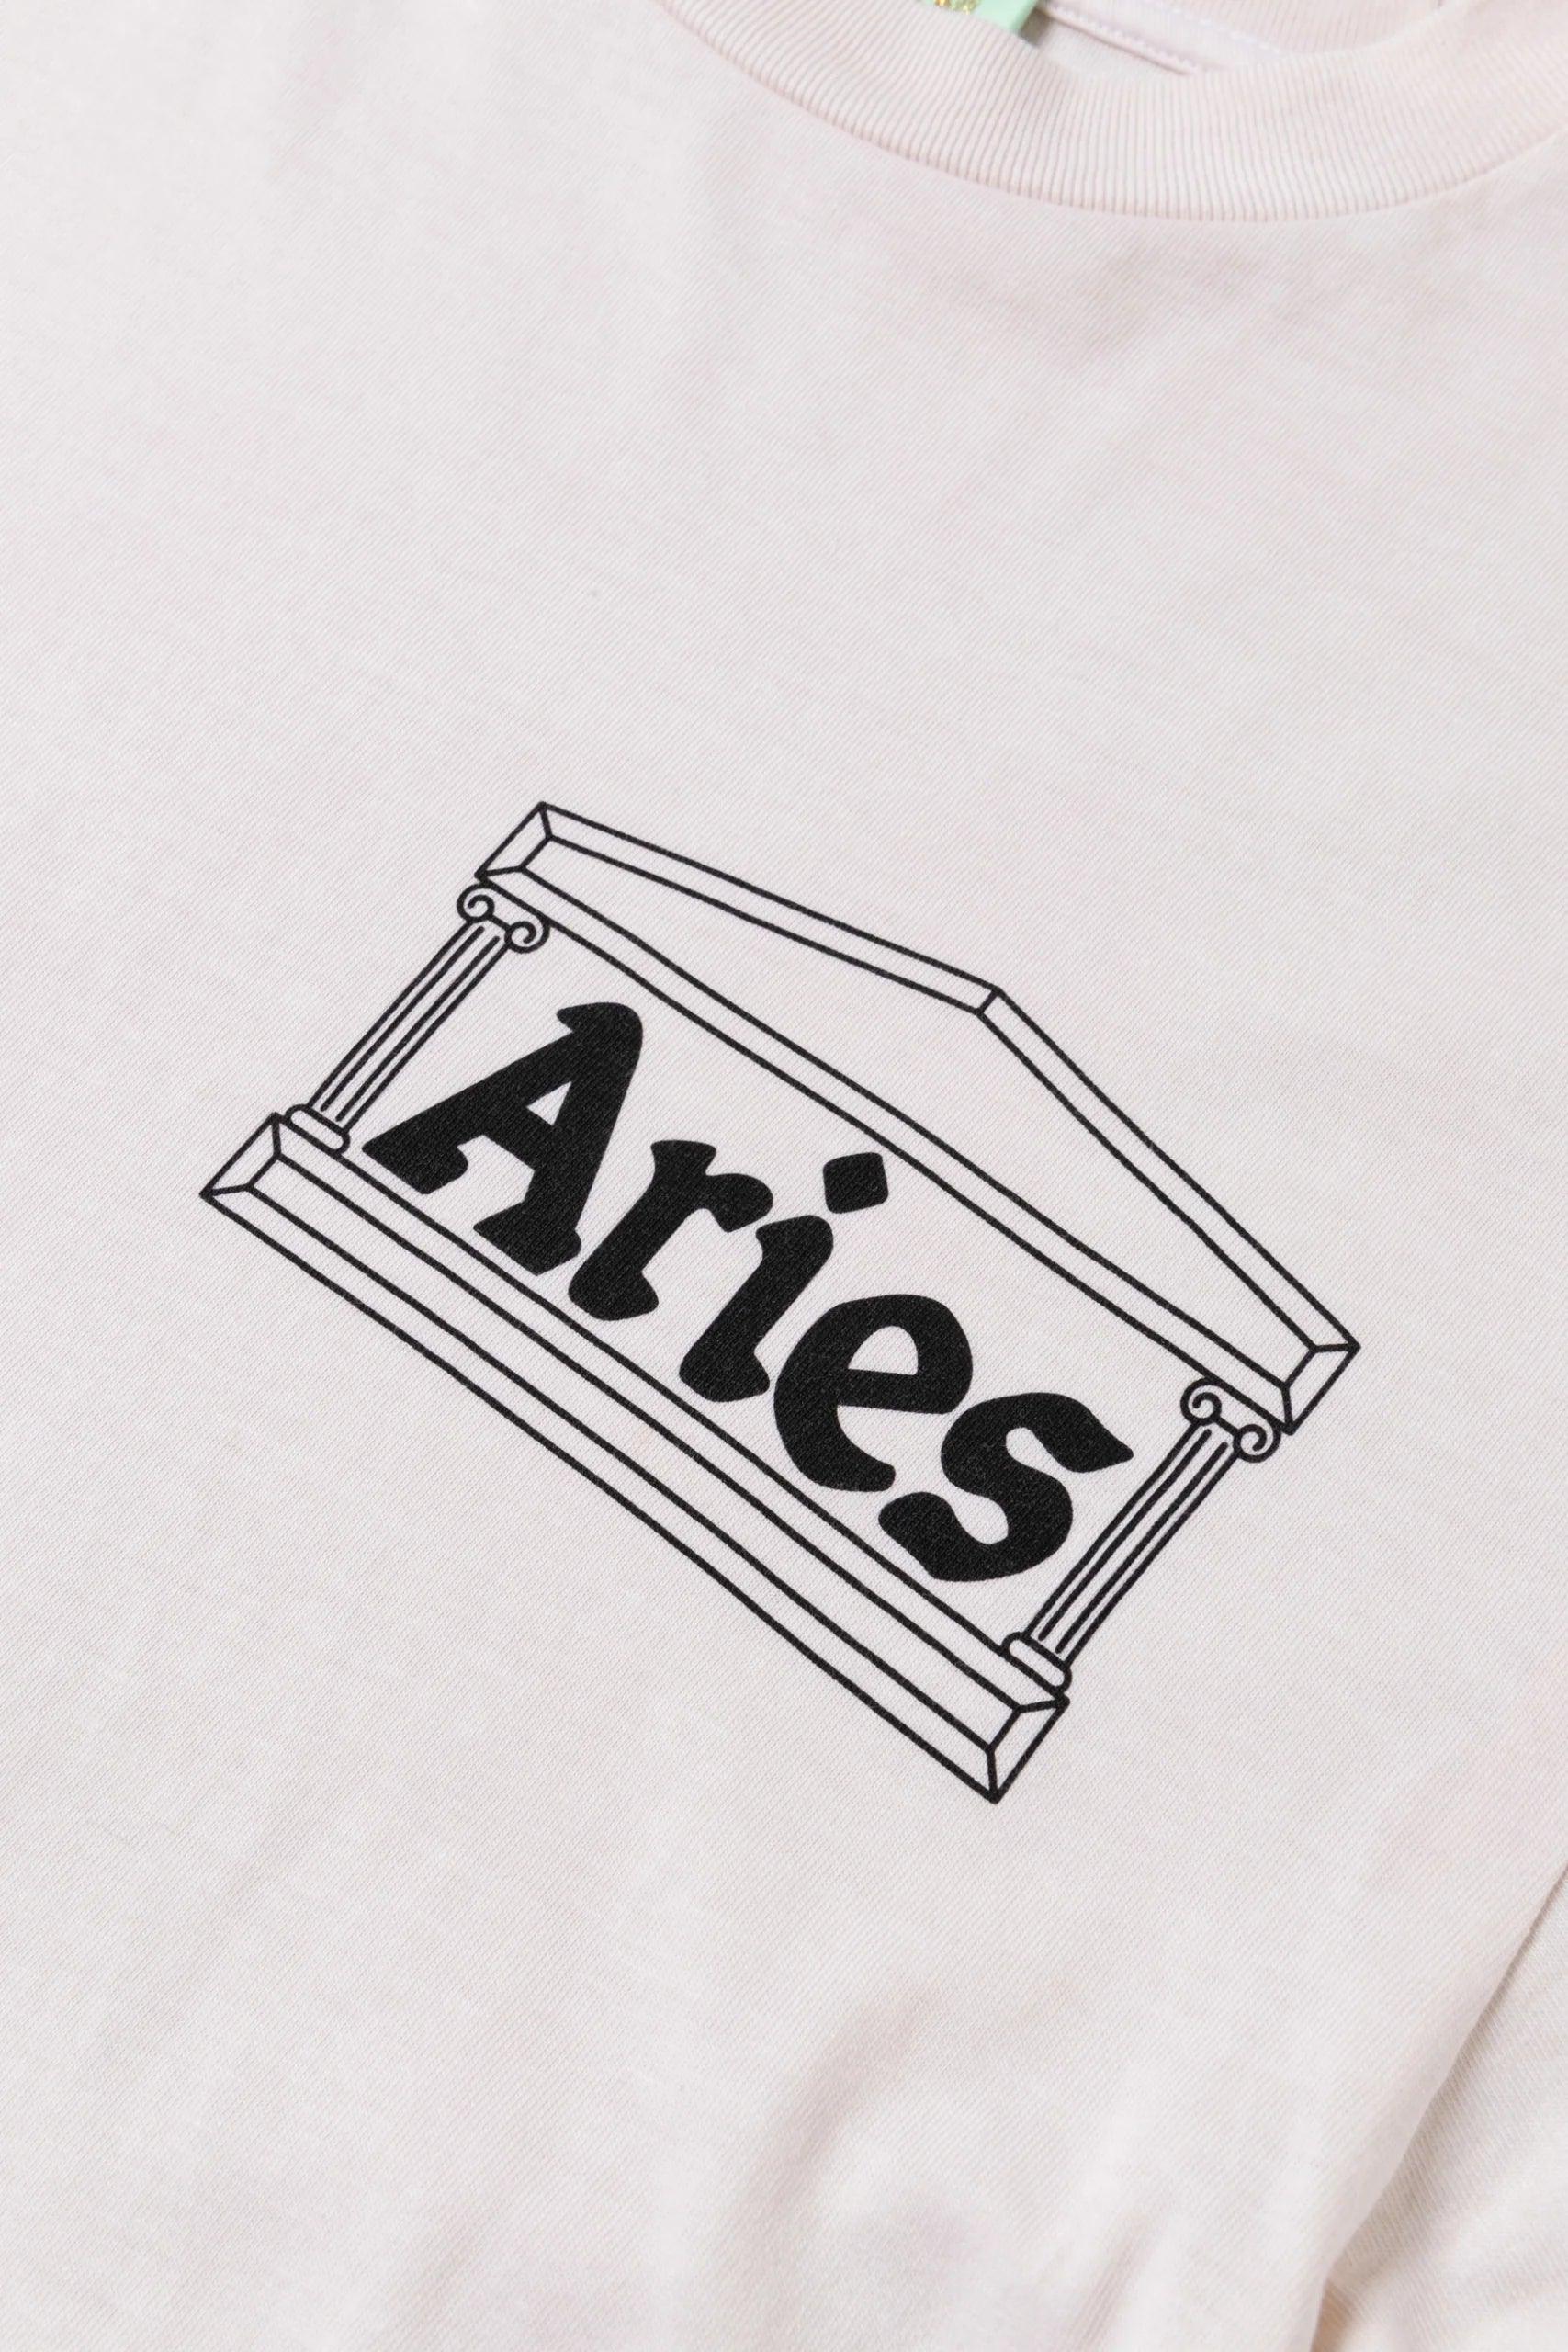 https://cdn.shopify.com/s/files/1/0740/7407/files/aries-arise-temple-ss-tee-pale-pink-t-shirts-897.webp